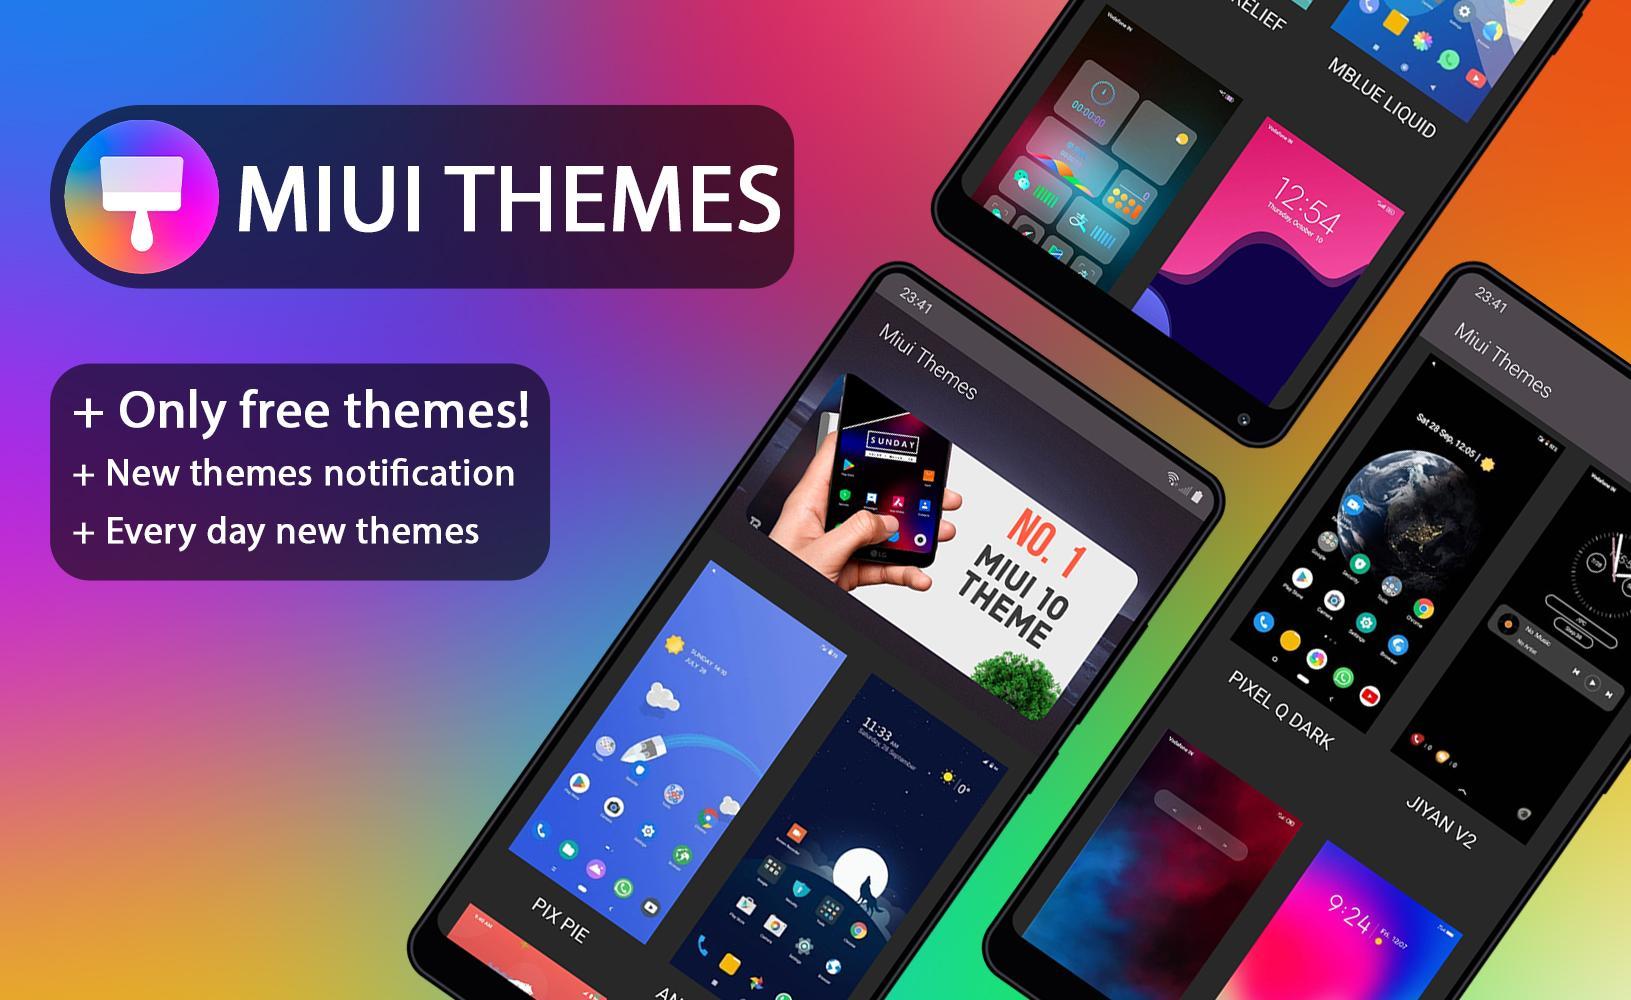 Themes for MIUI - Only FREE! 2.1.2 Screenshot 1